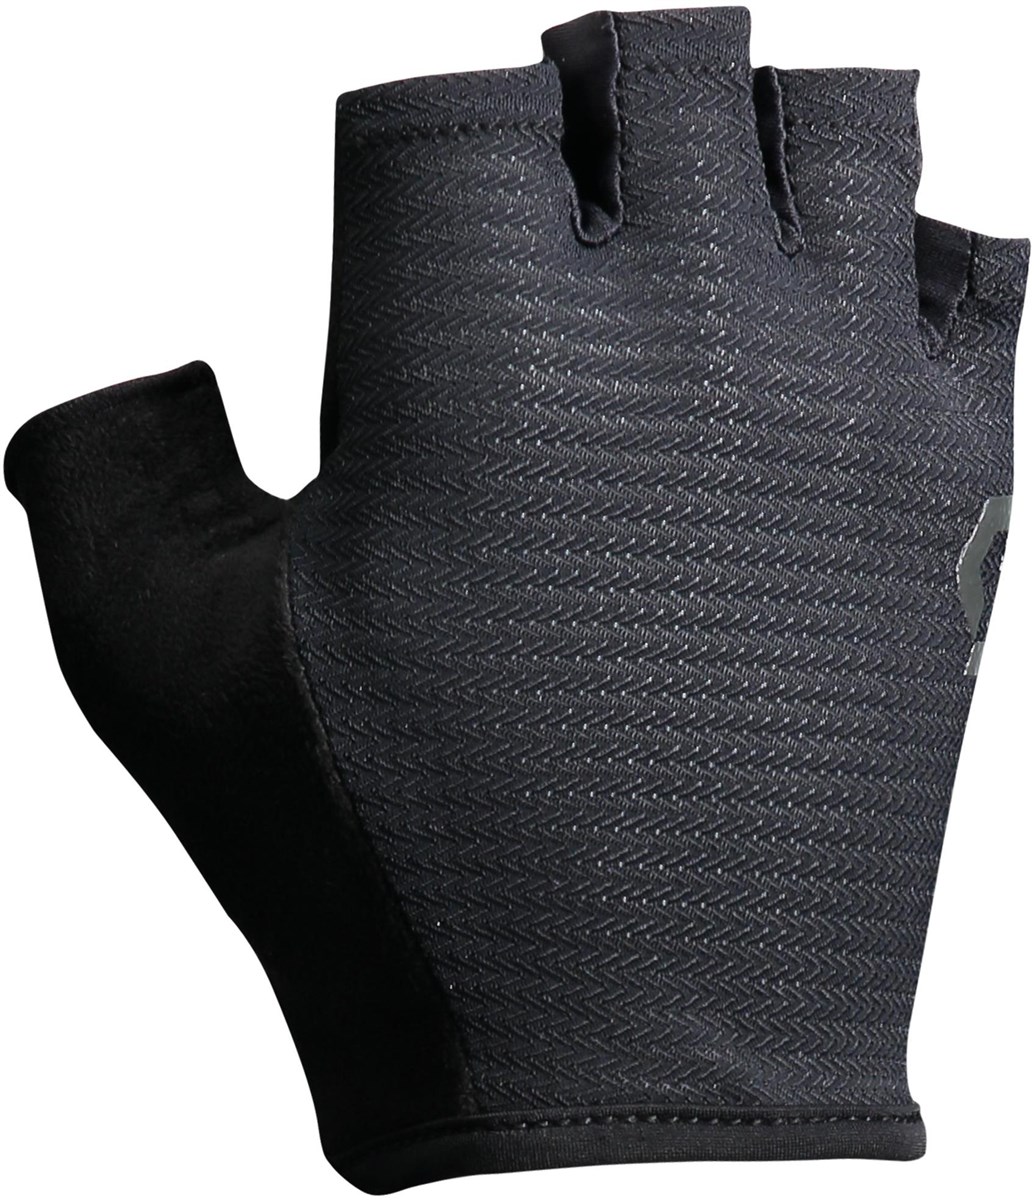 Scott Aspect Sport Gel Womens Cycling Mitts / Gloves product image